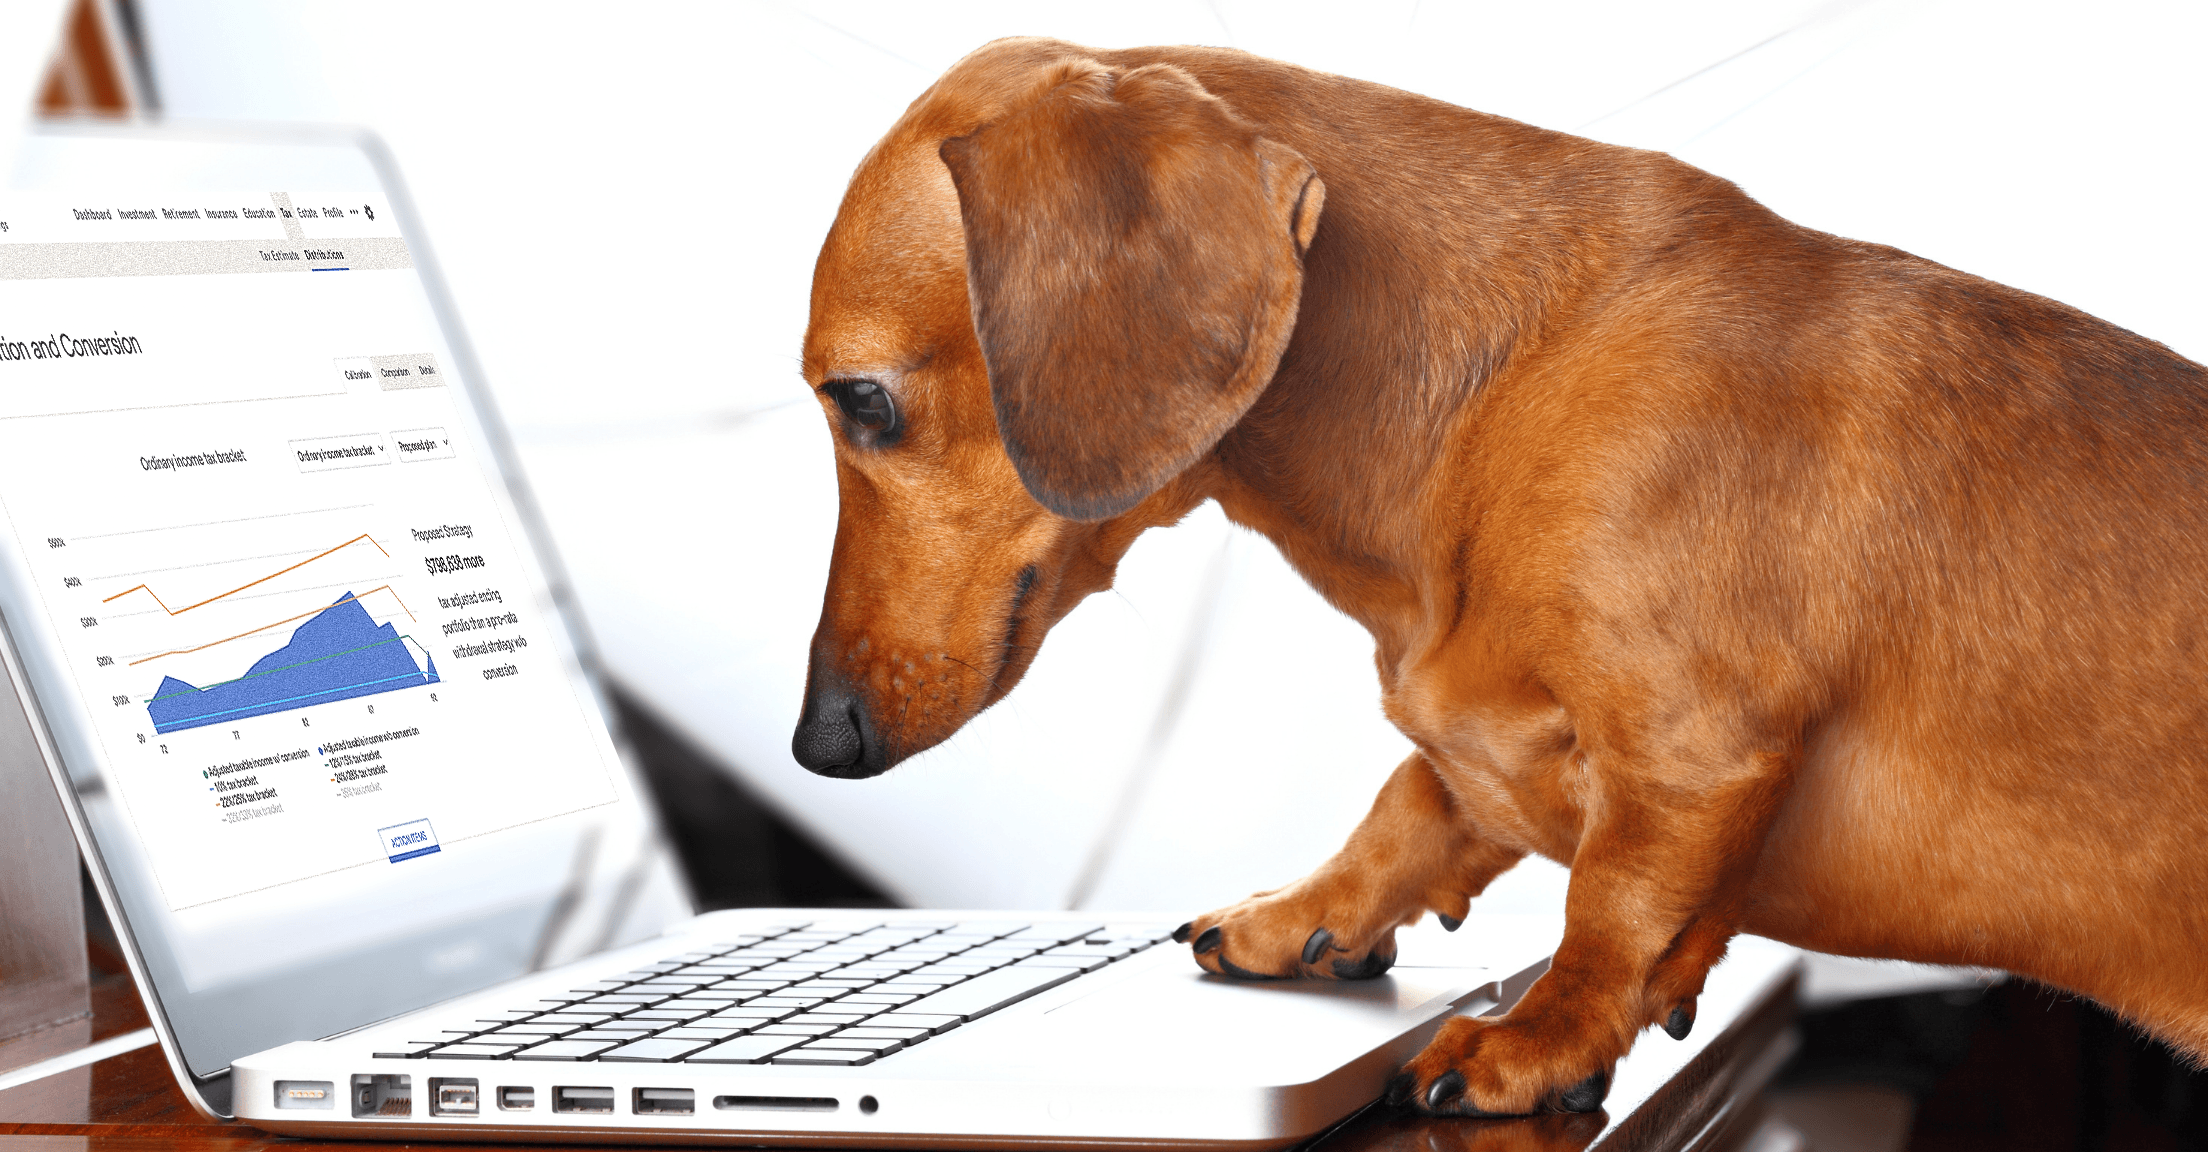 A dachshund puppy looking at a computer screen with a RightCapital screenshot of tax distribution strategies